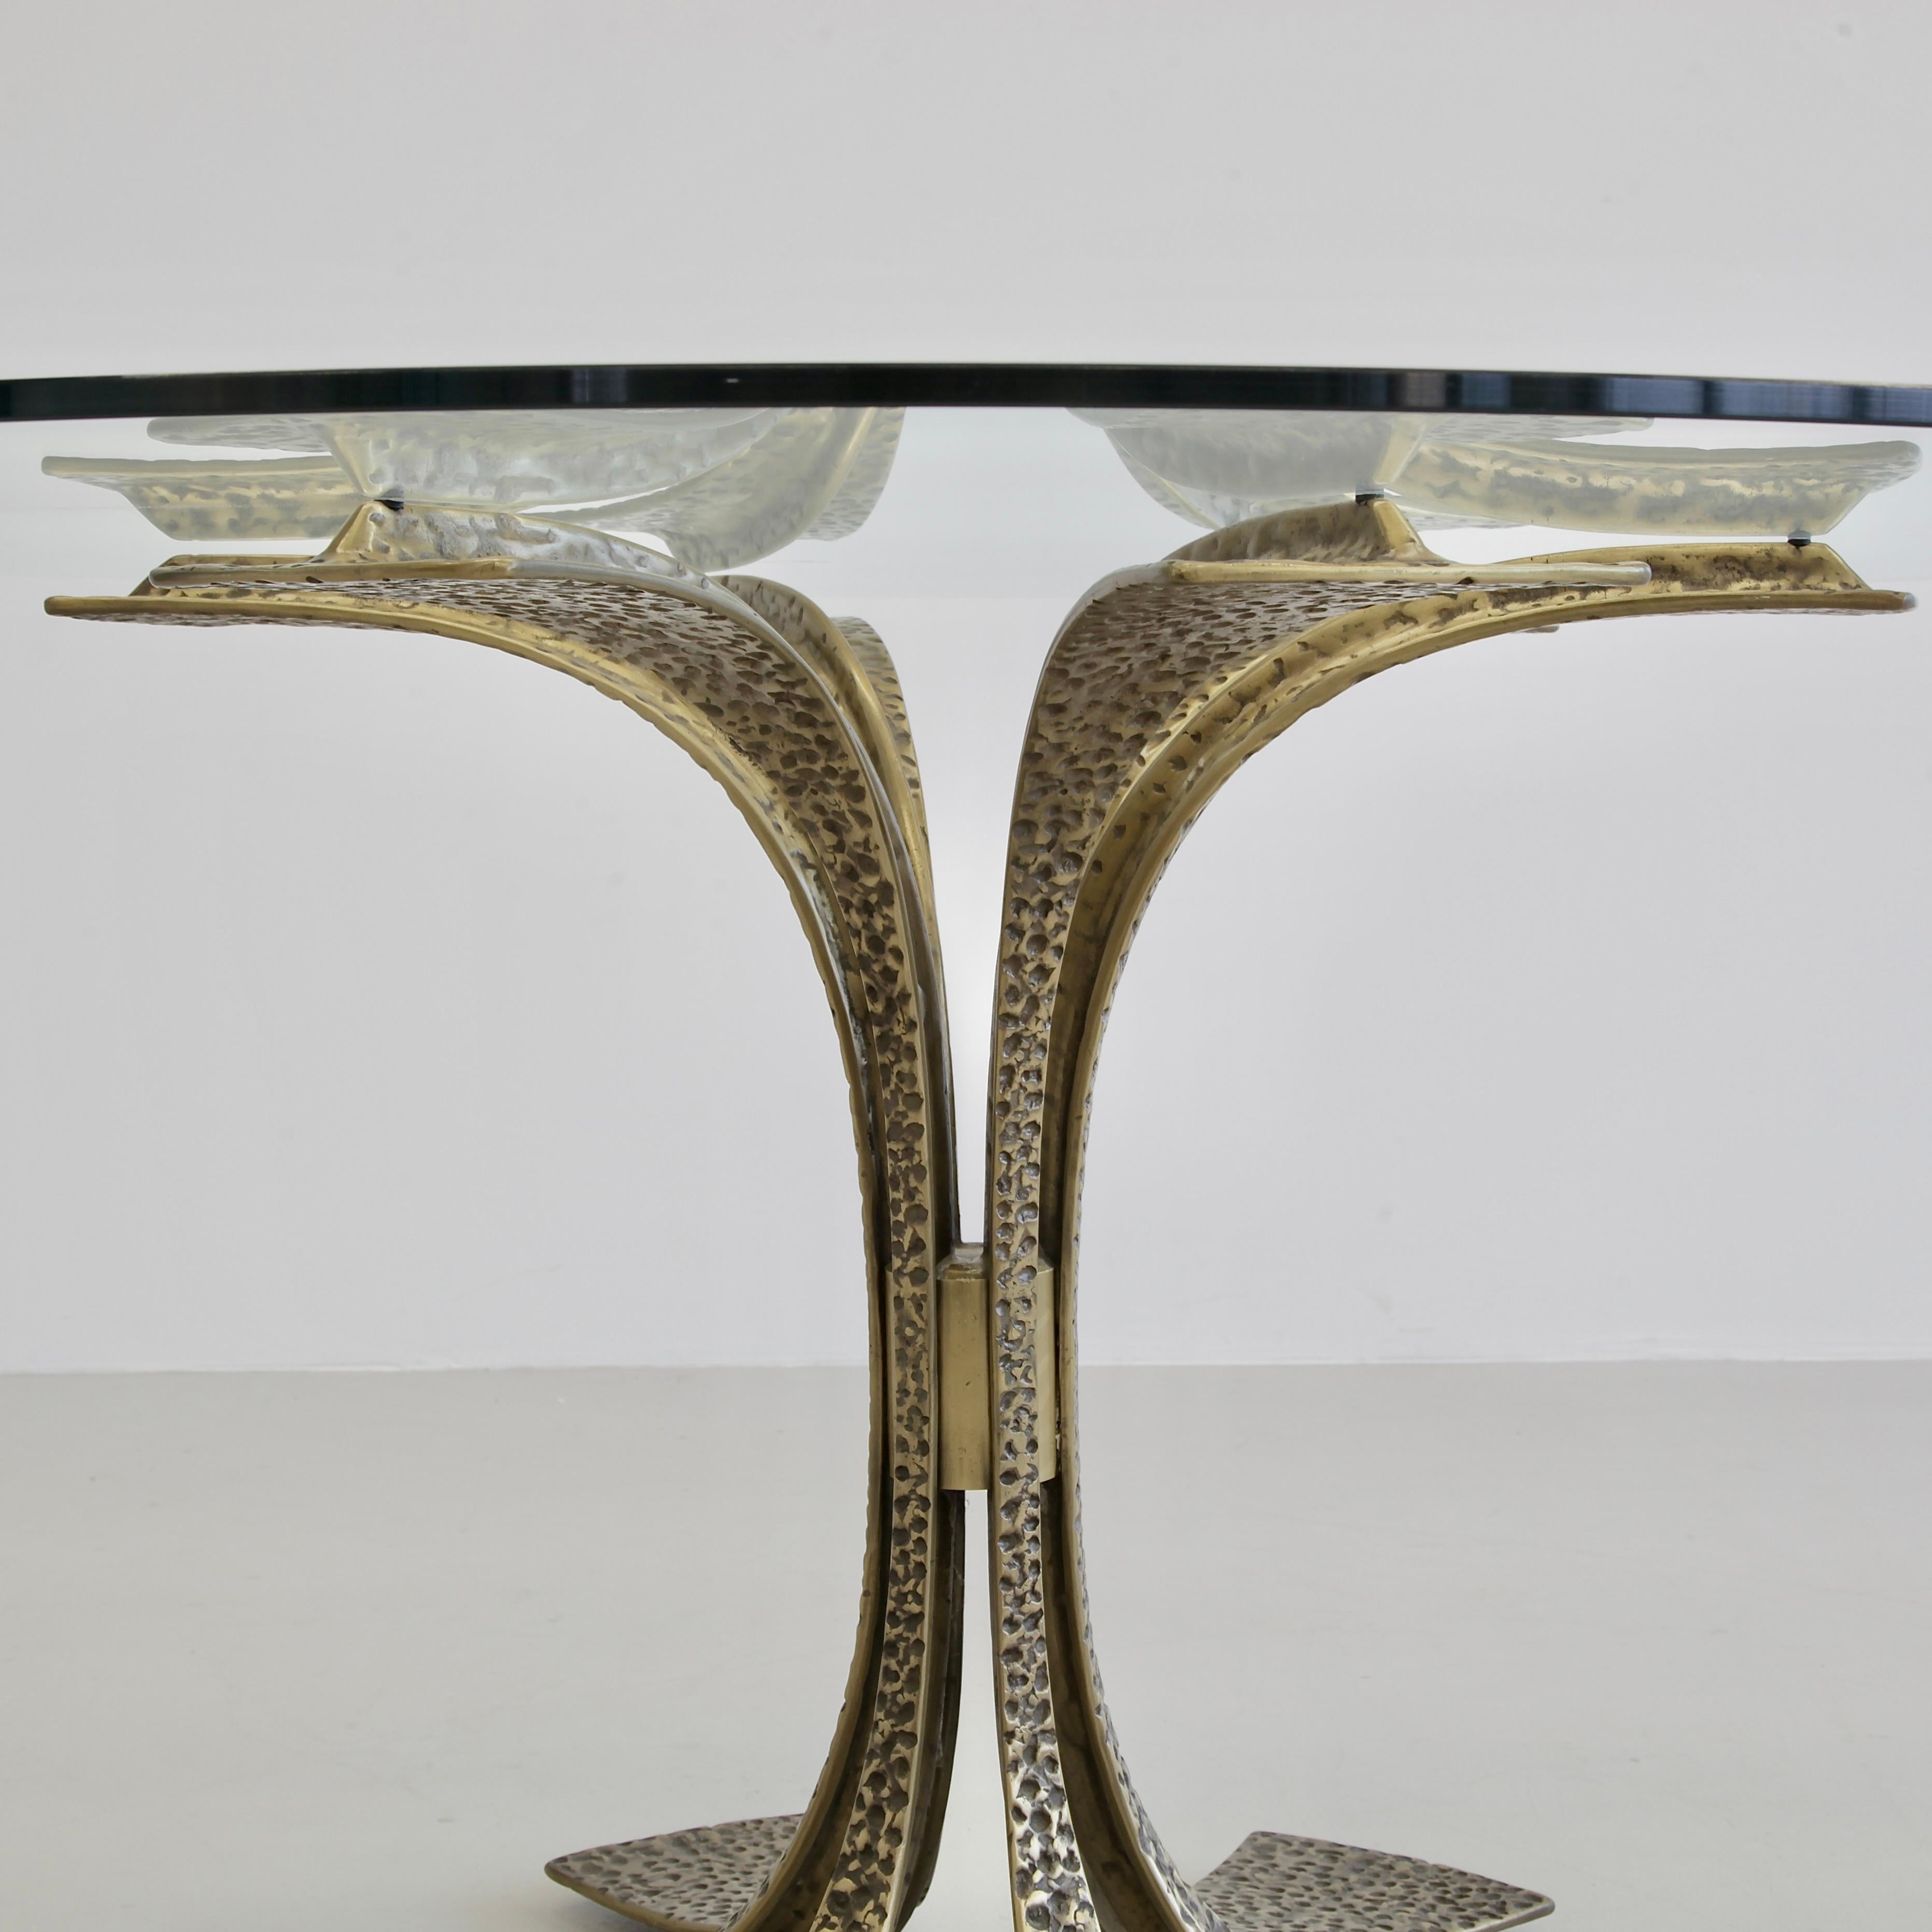 Dining table, designed by Luciano Frigerio. Italy, Frigerio di Desio, 1968.

Round table, model JUAN with hammered brass base and glass top. Sensational!
Condition: 

Excellent vintage condition.
 